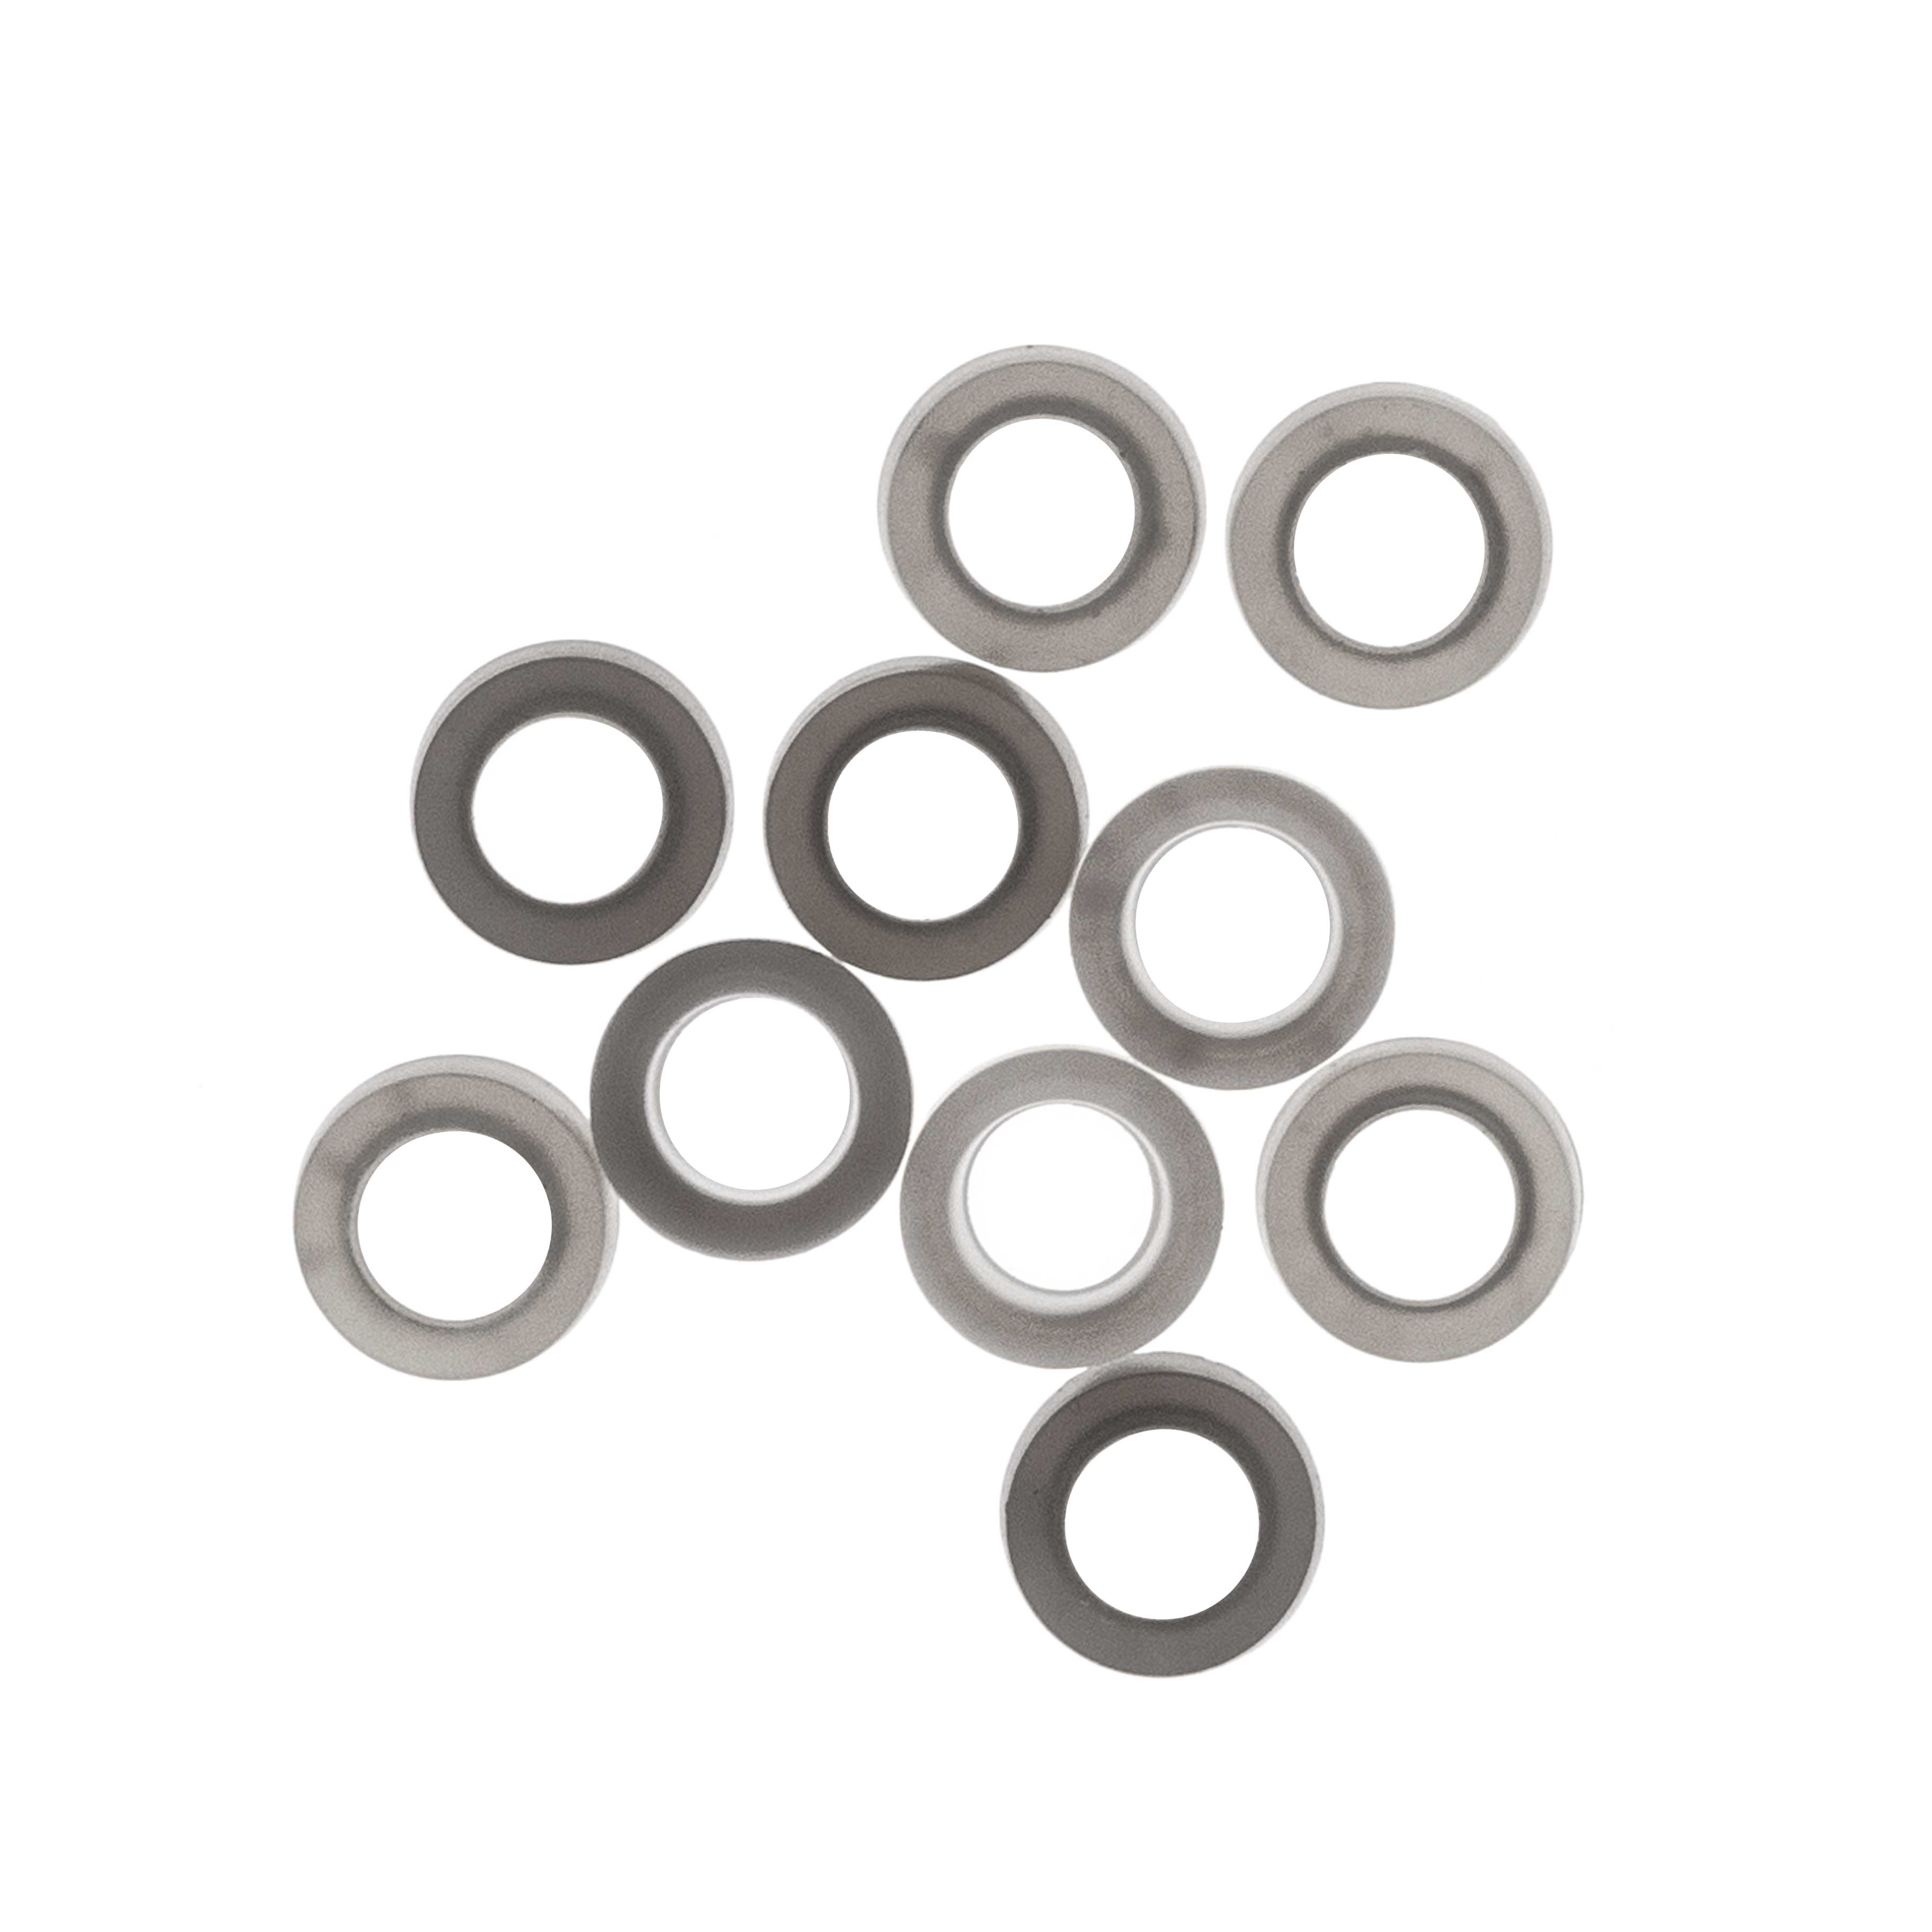 Spare PTFE sealing ring 22x10mm for GL-25